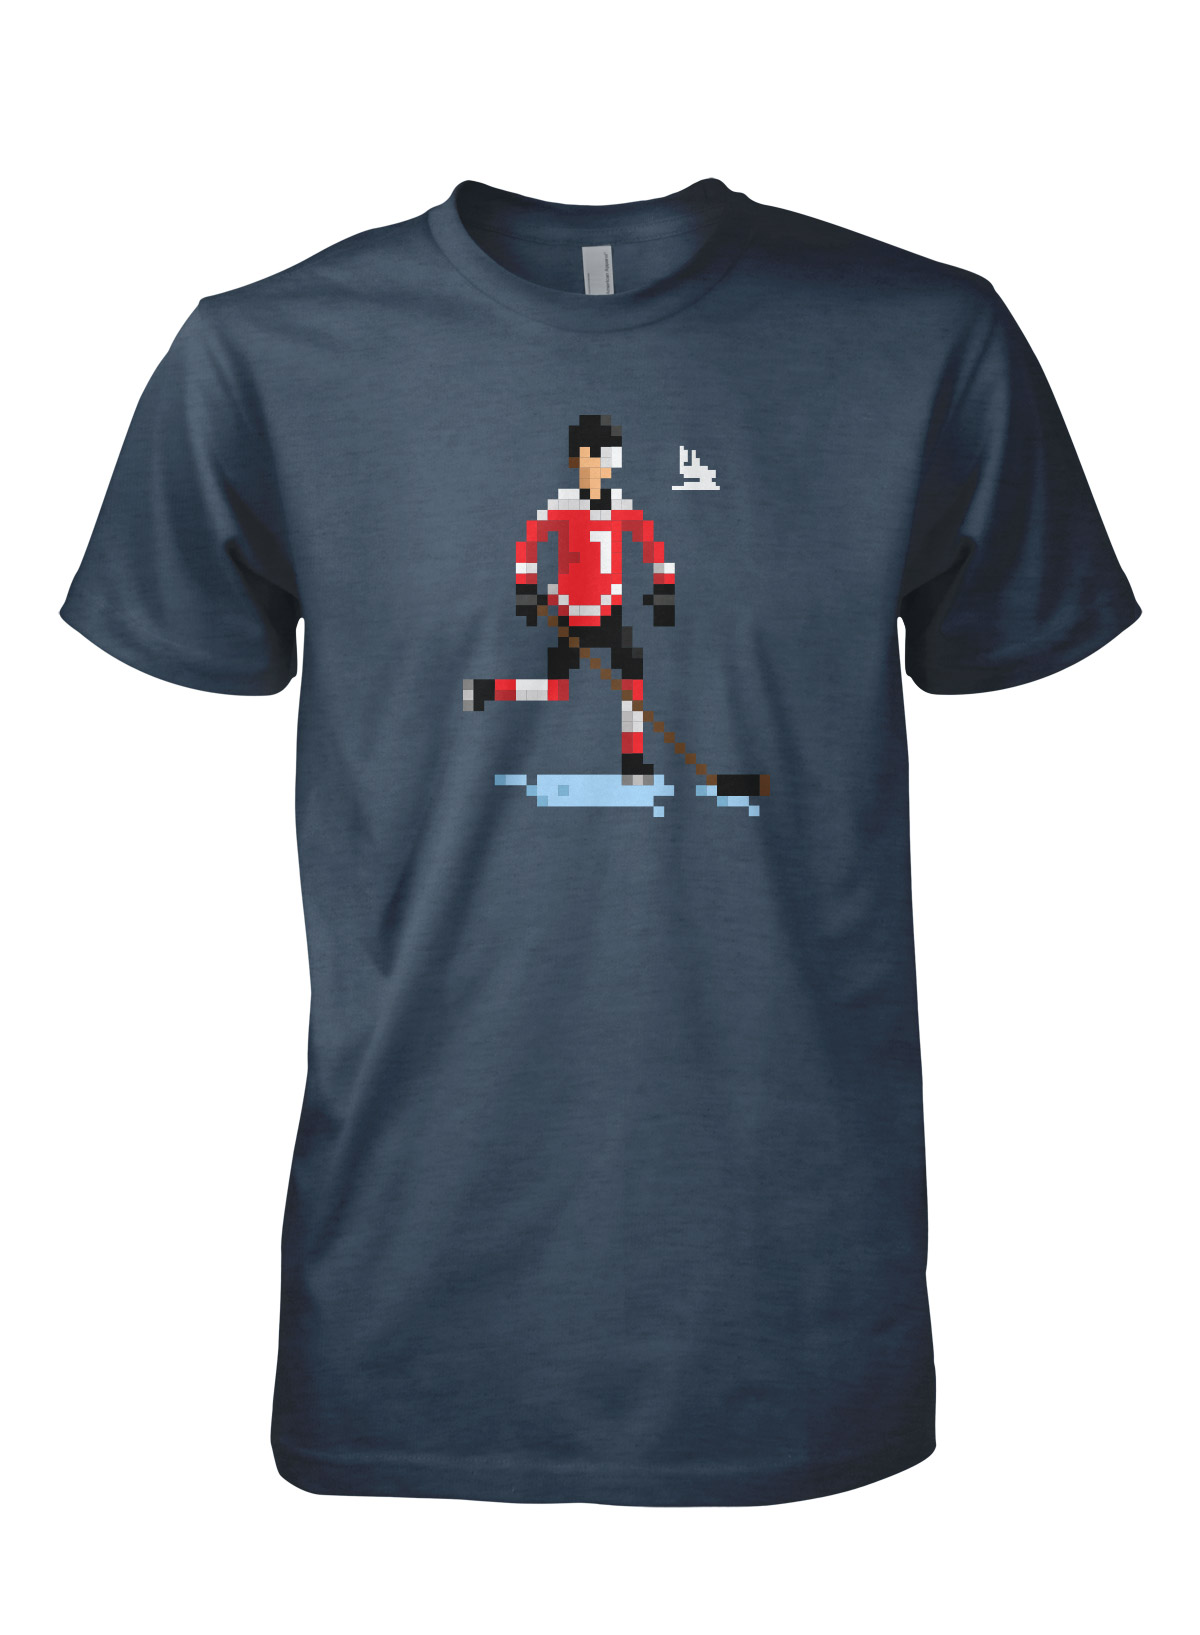 Hockey T Shirt Crest by Scrappers Hockey